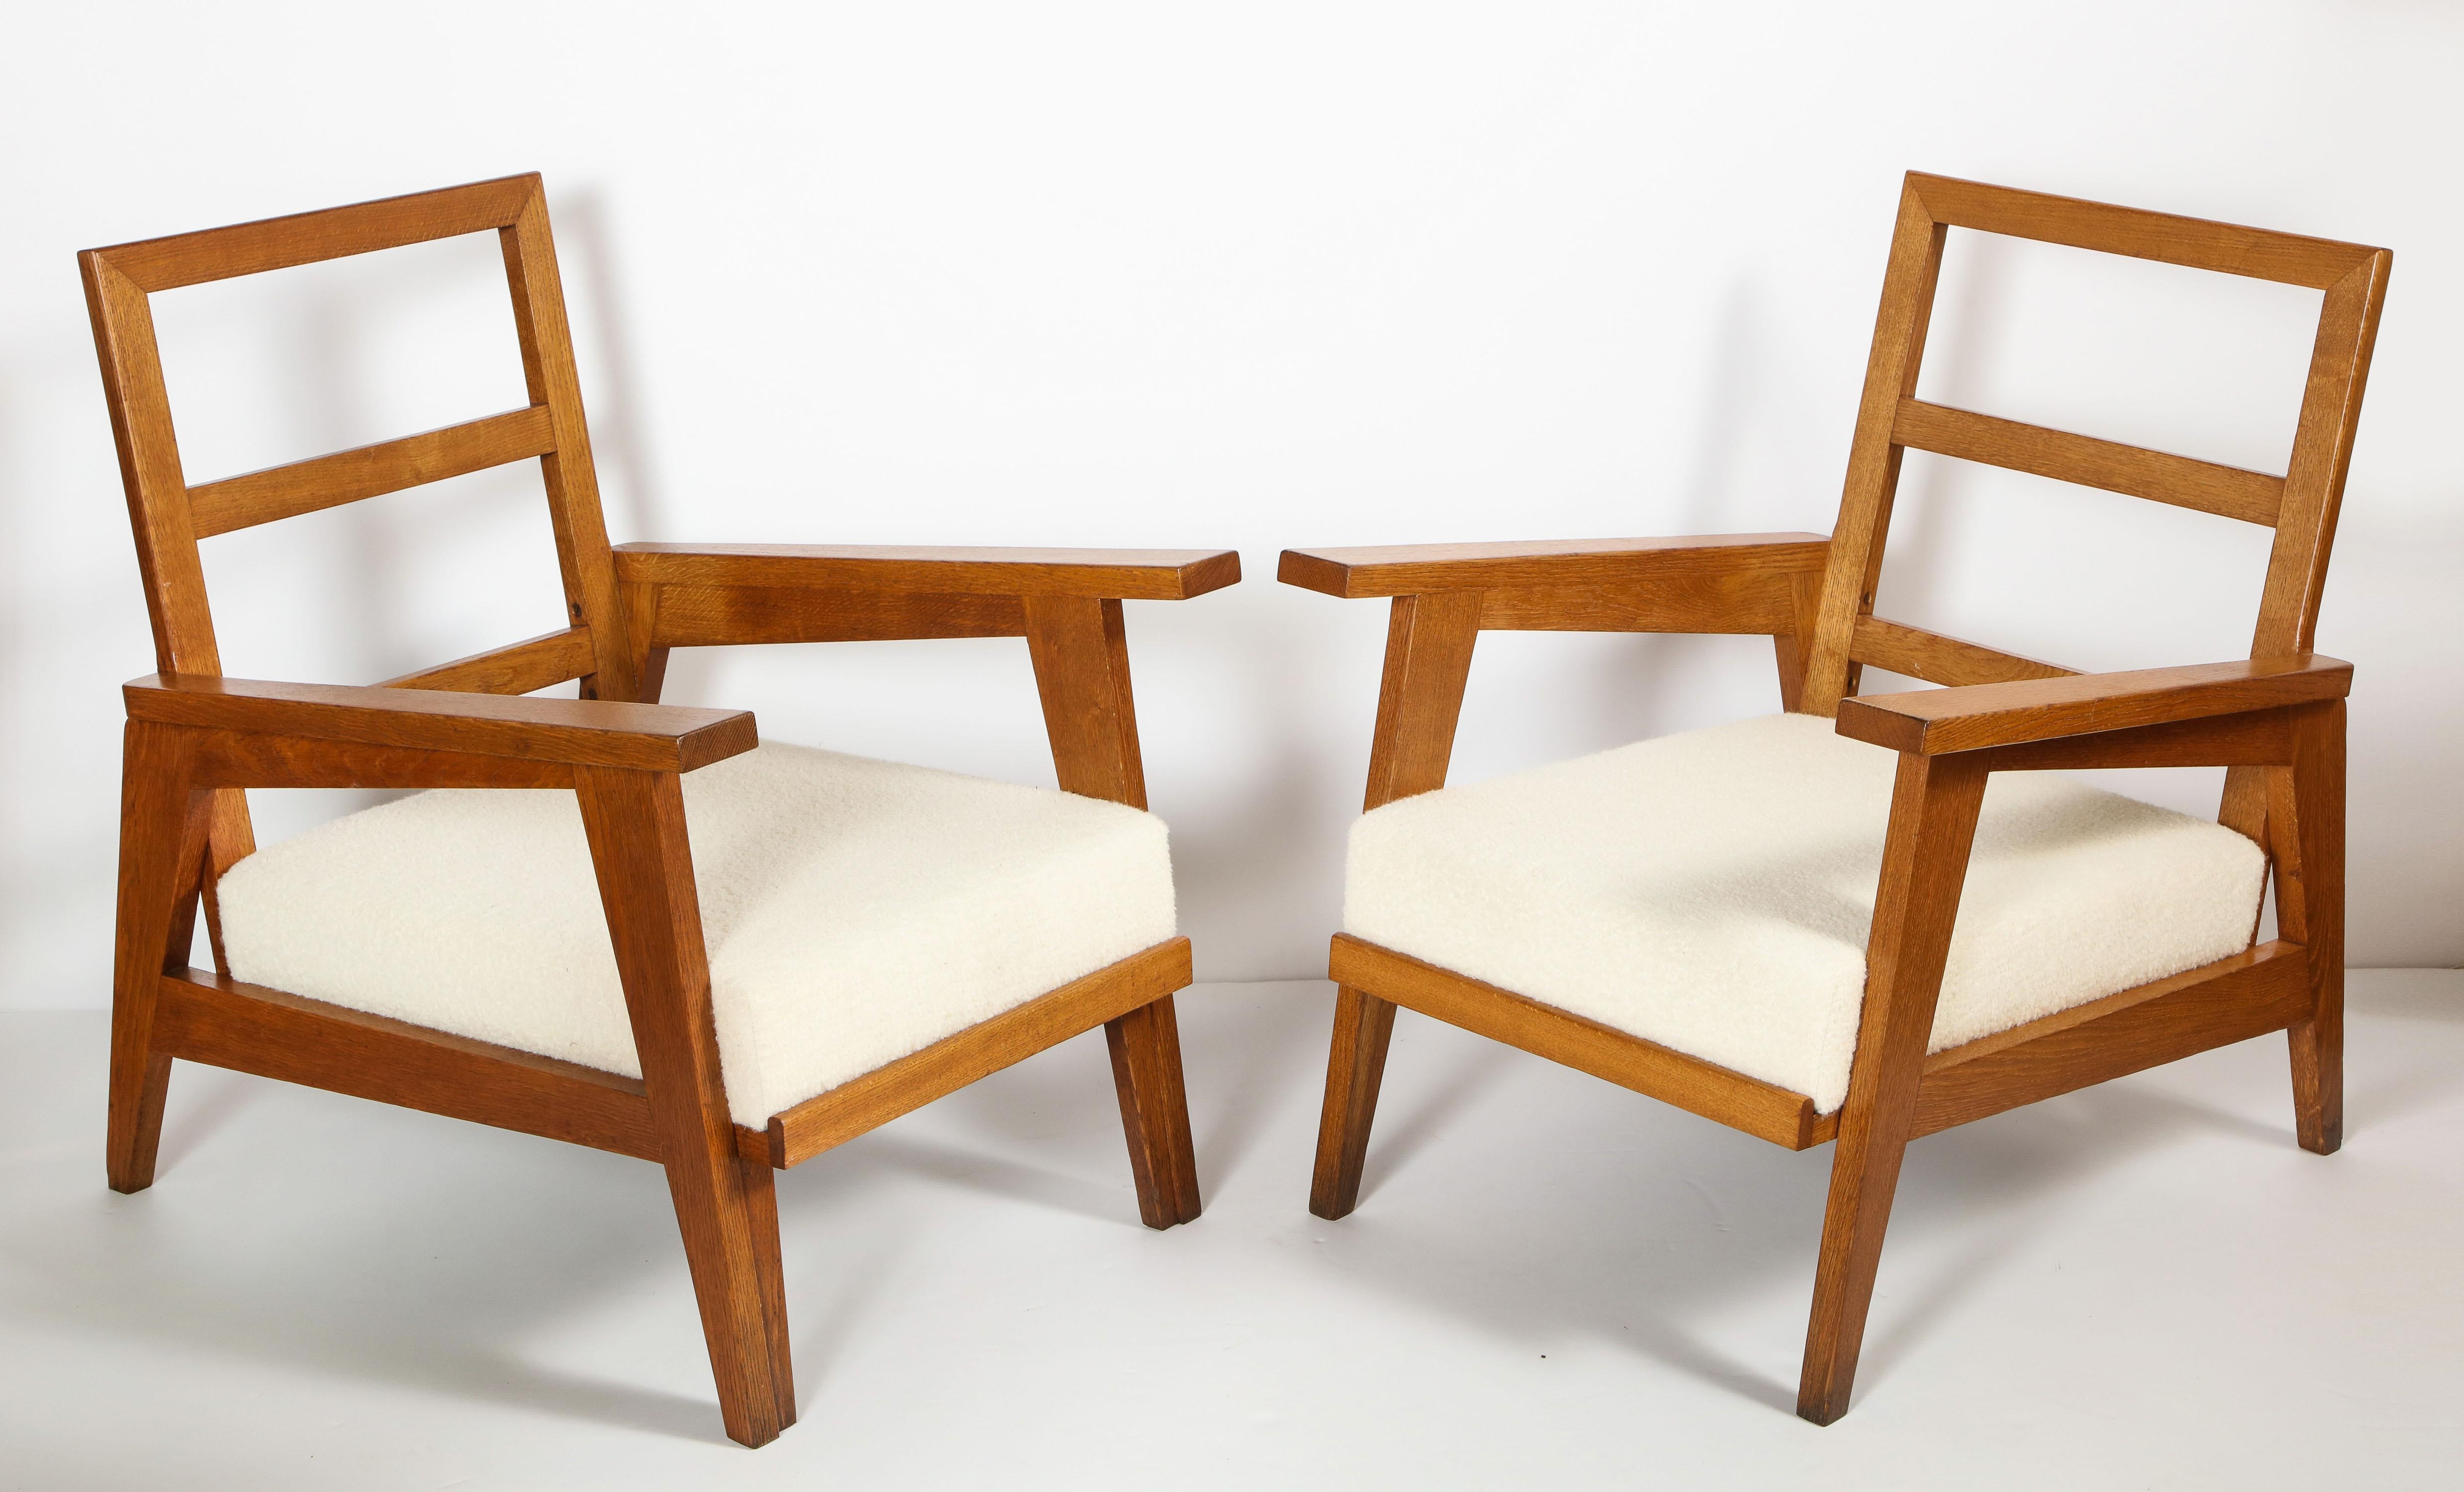 Pair of solid Oak armchairs attributed to Rene Gabriel, newly refinished and upholstered.